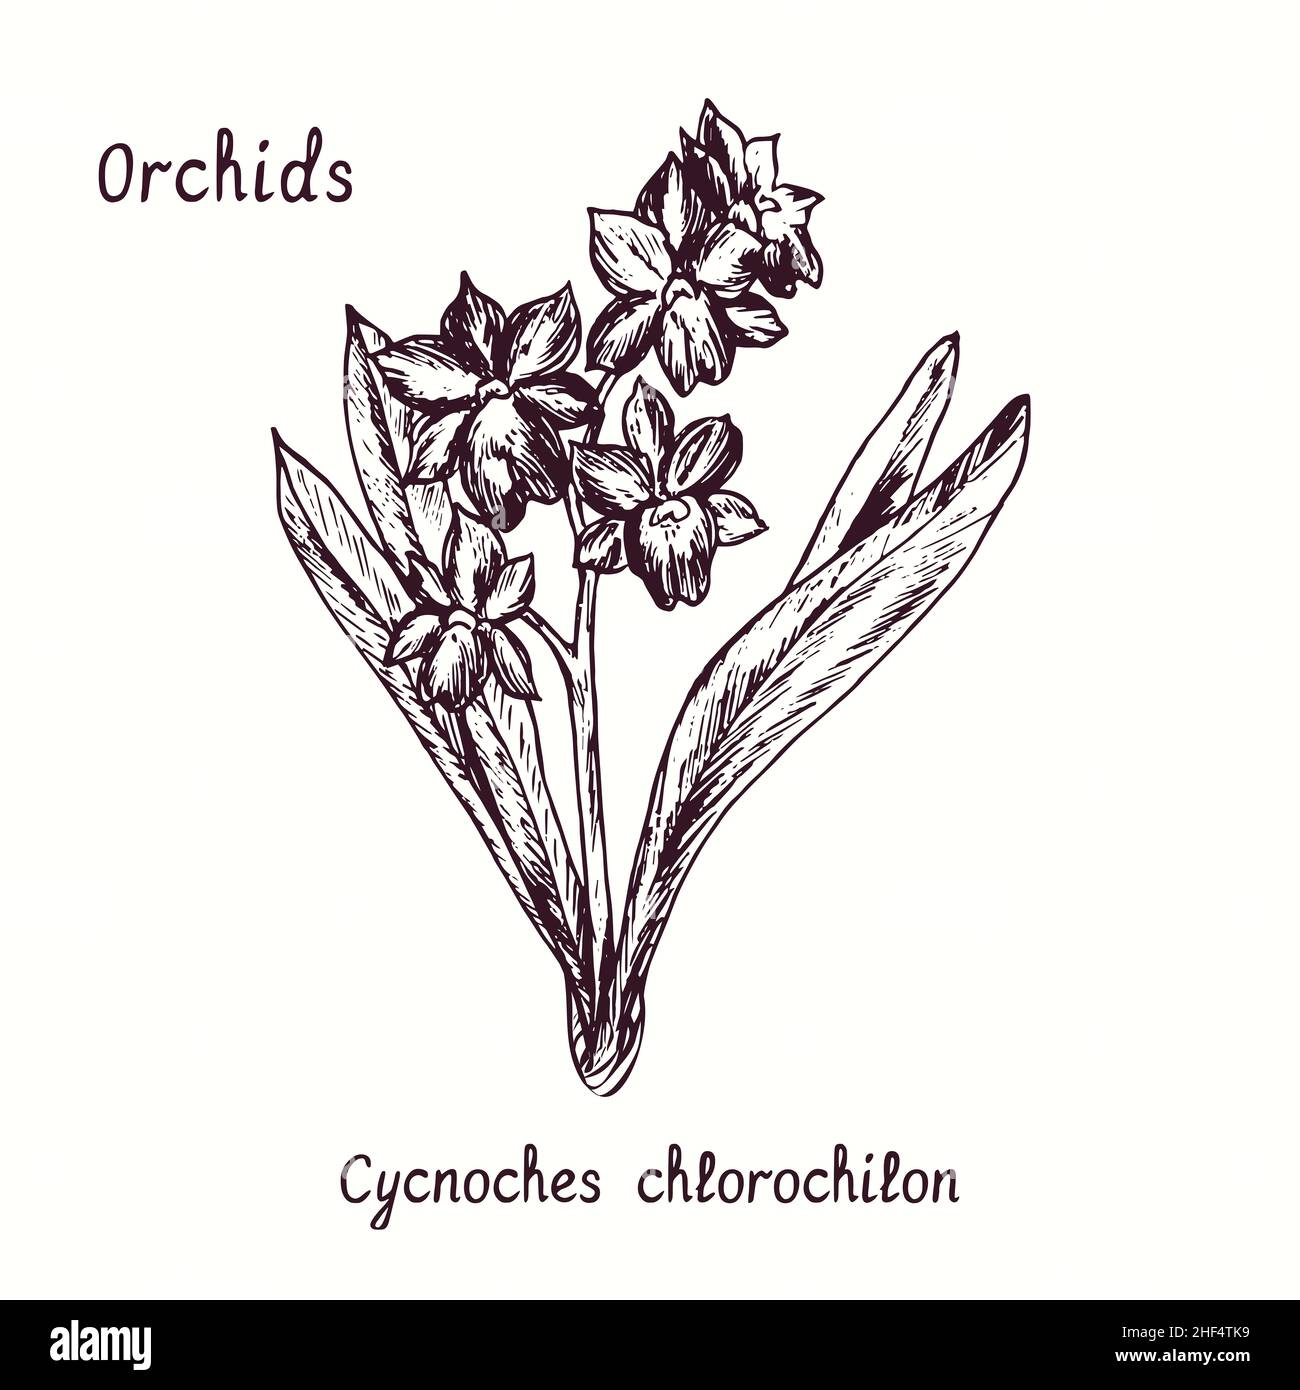 Cycnoches chlorochilon orchids flower collection. Ink black and white doodle drawing in woodcut style with inscription. Stock Photo